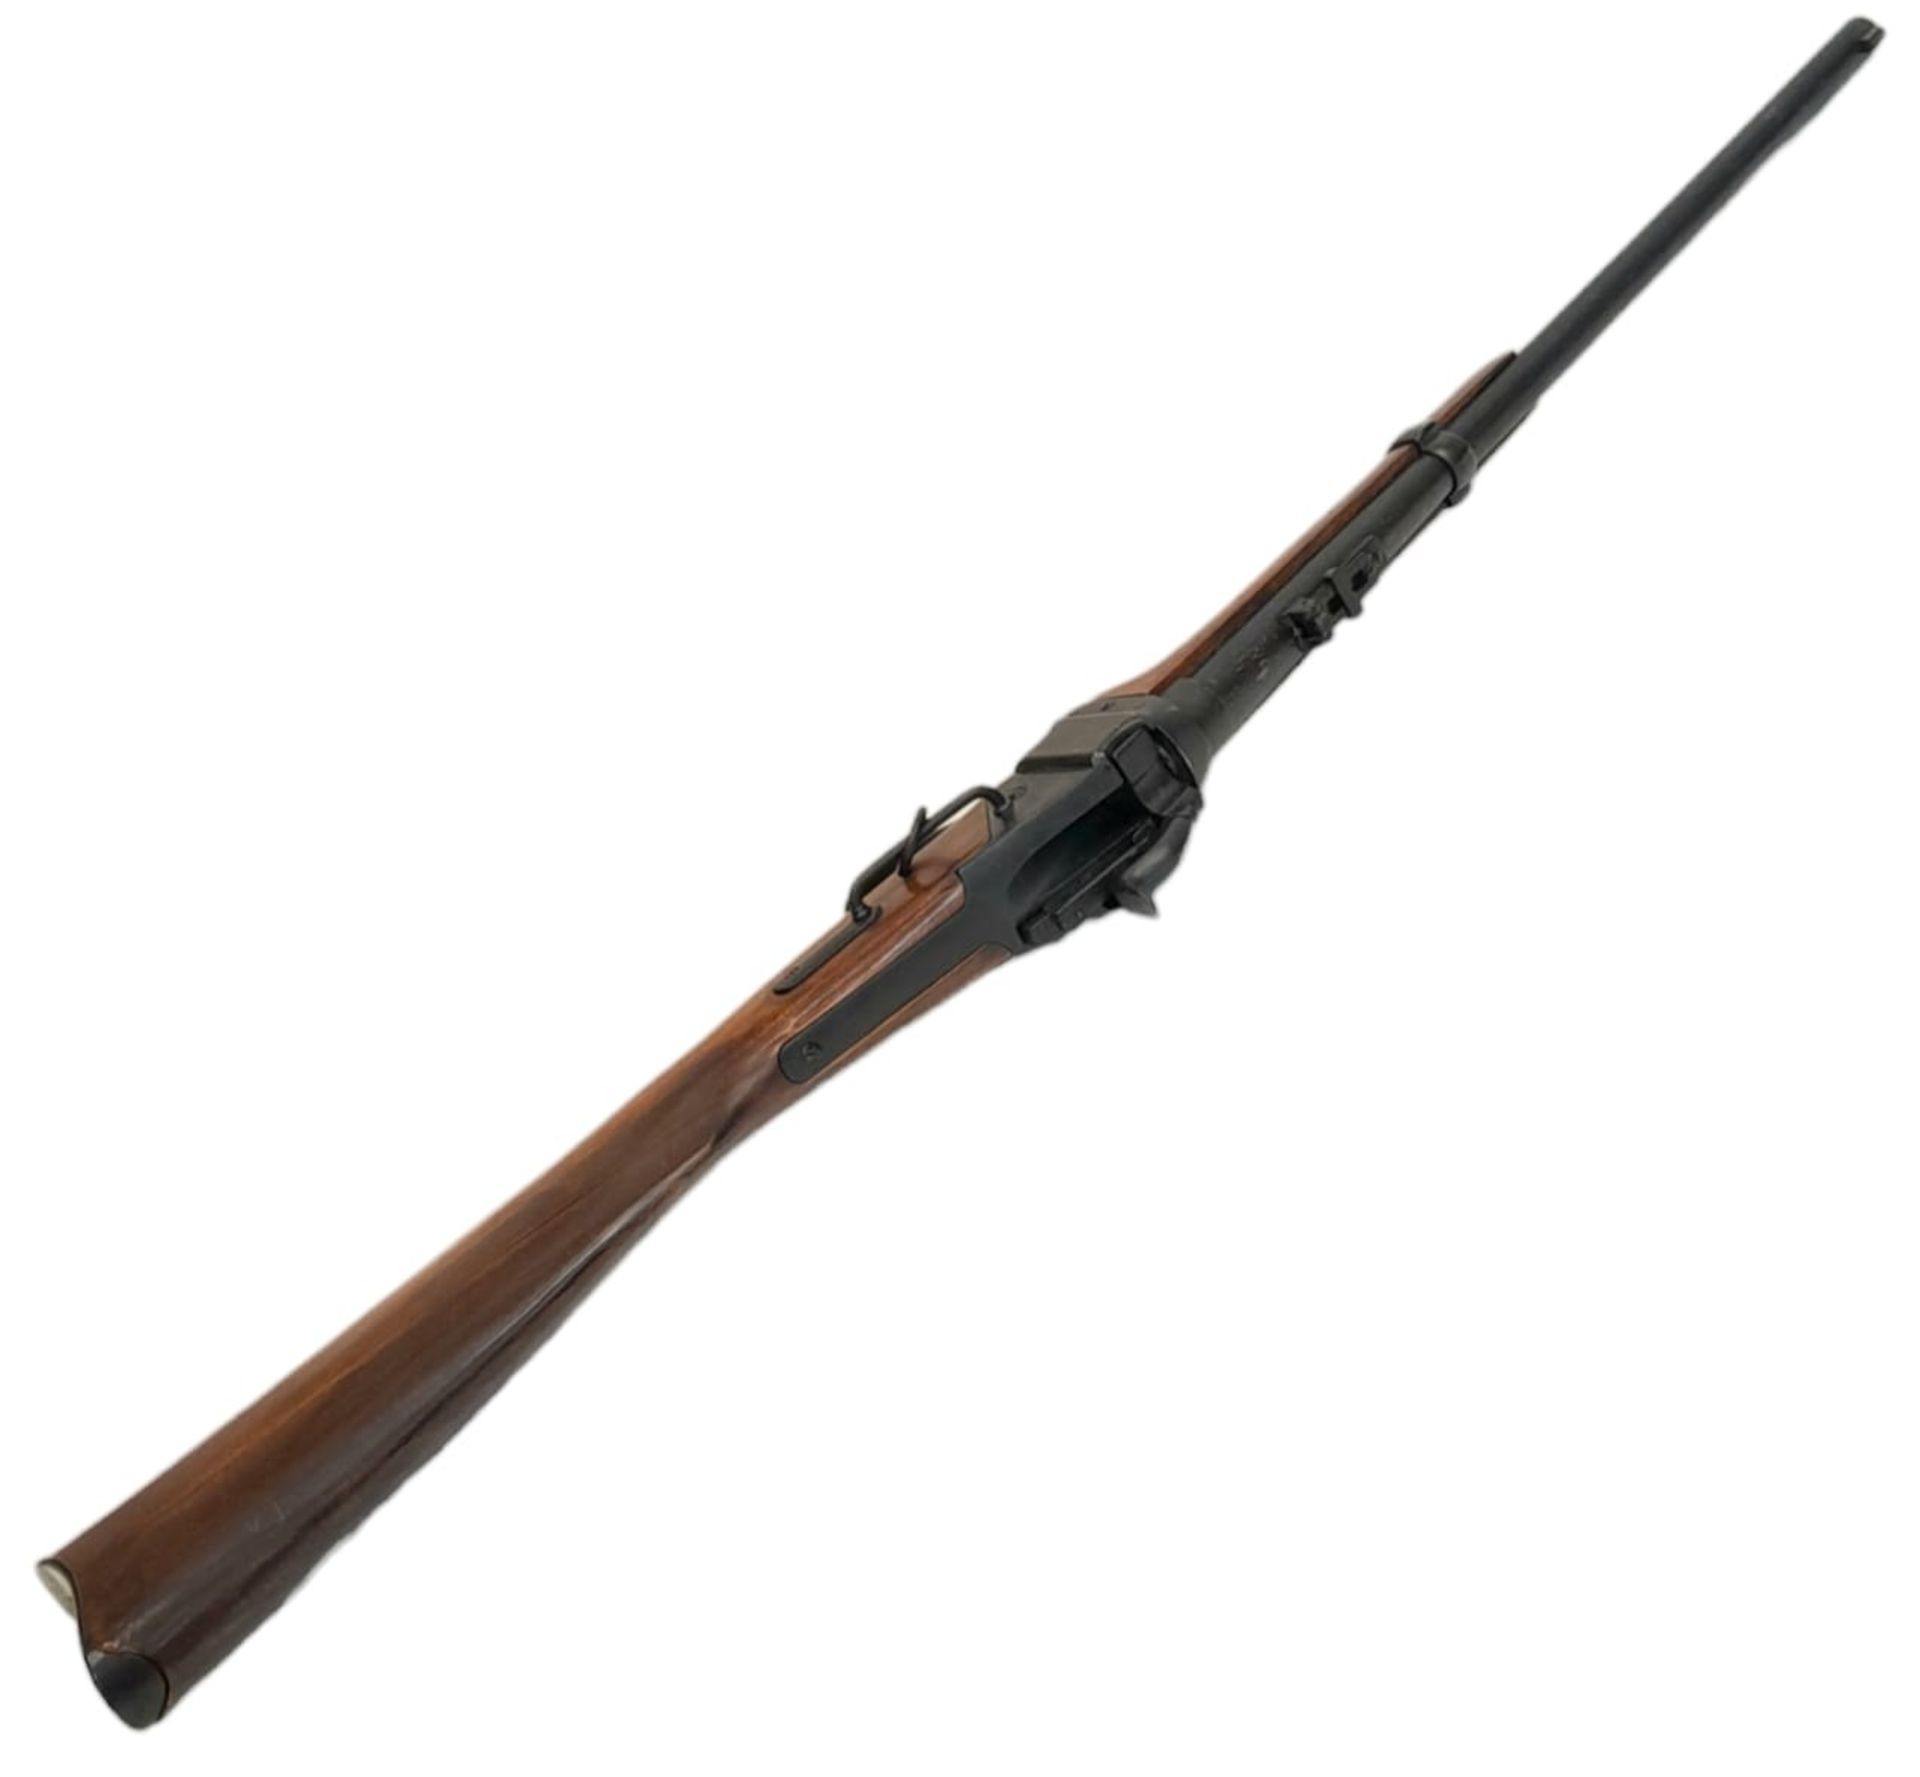 A Vintage, Full Weight and Size, Retrospective Inert Replica of an 1859 Carbine Rifle. Wood and - Image 5 of 11